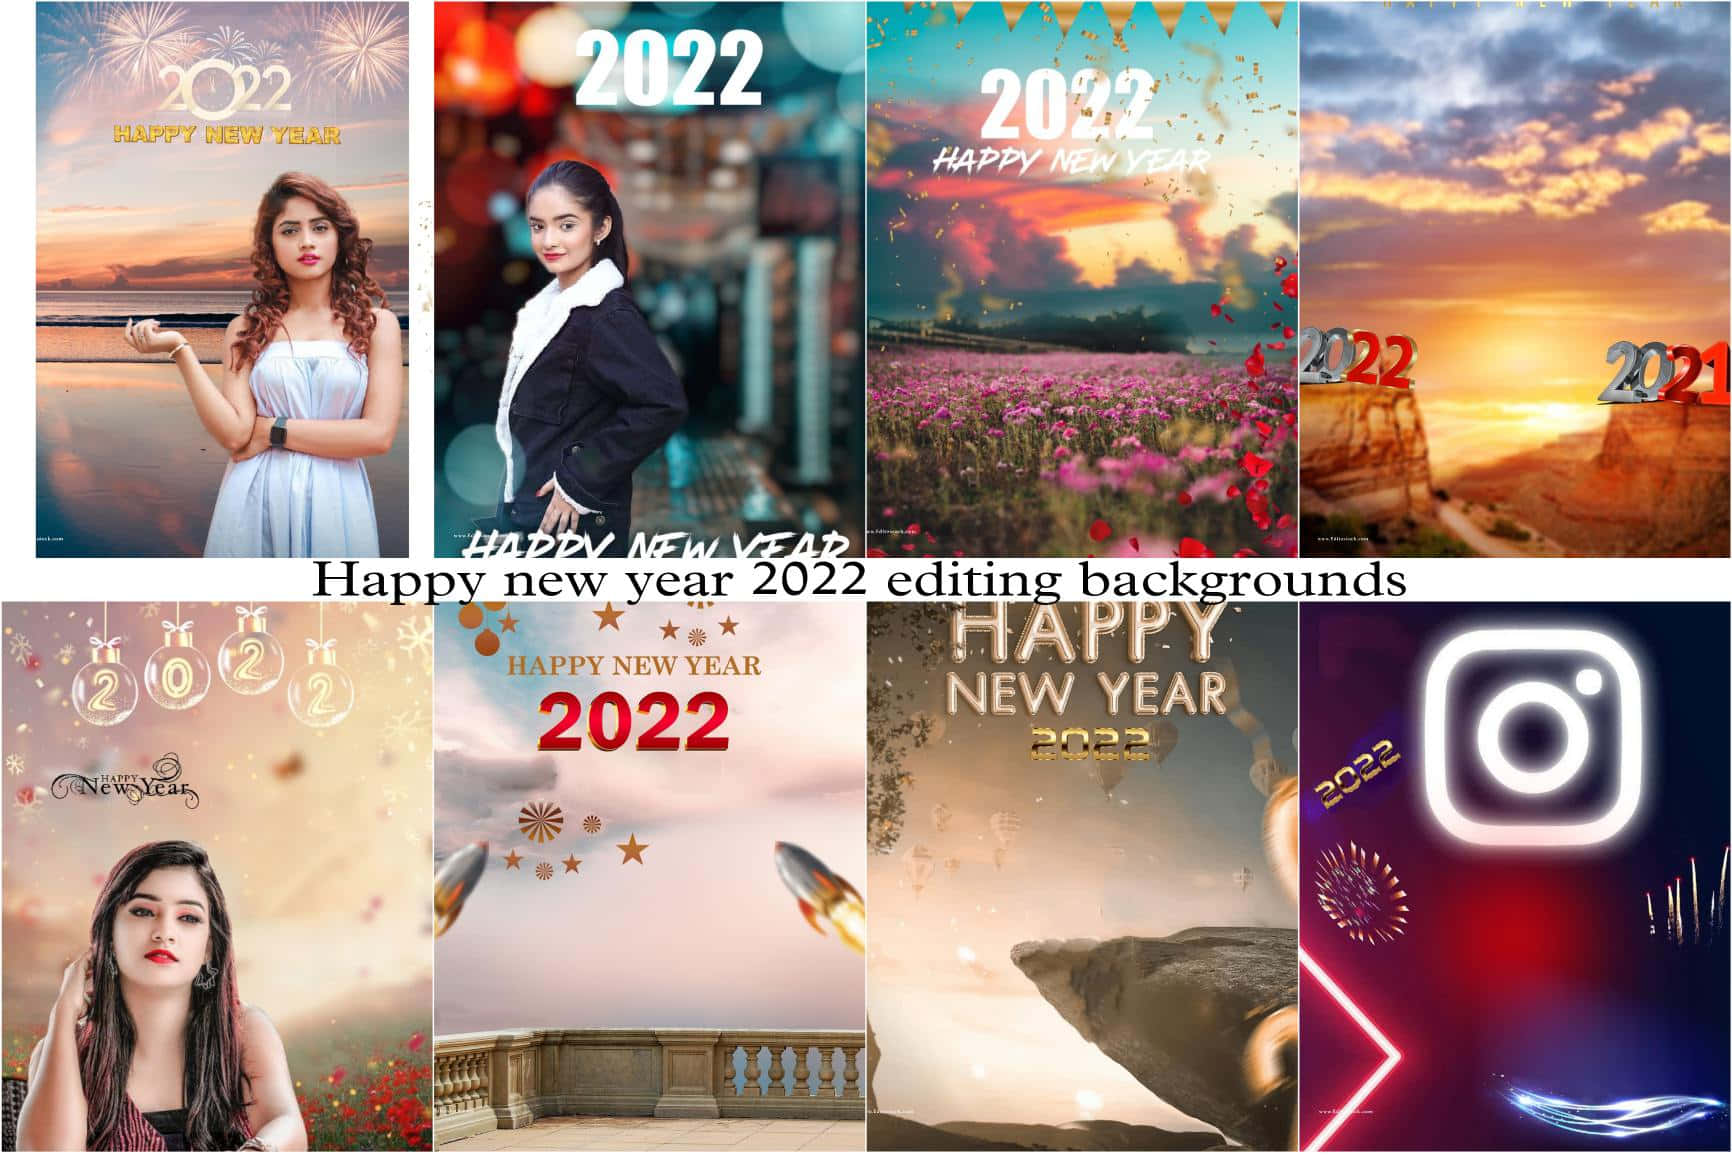 Welcome to the Year 2022!